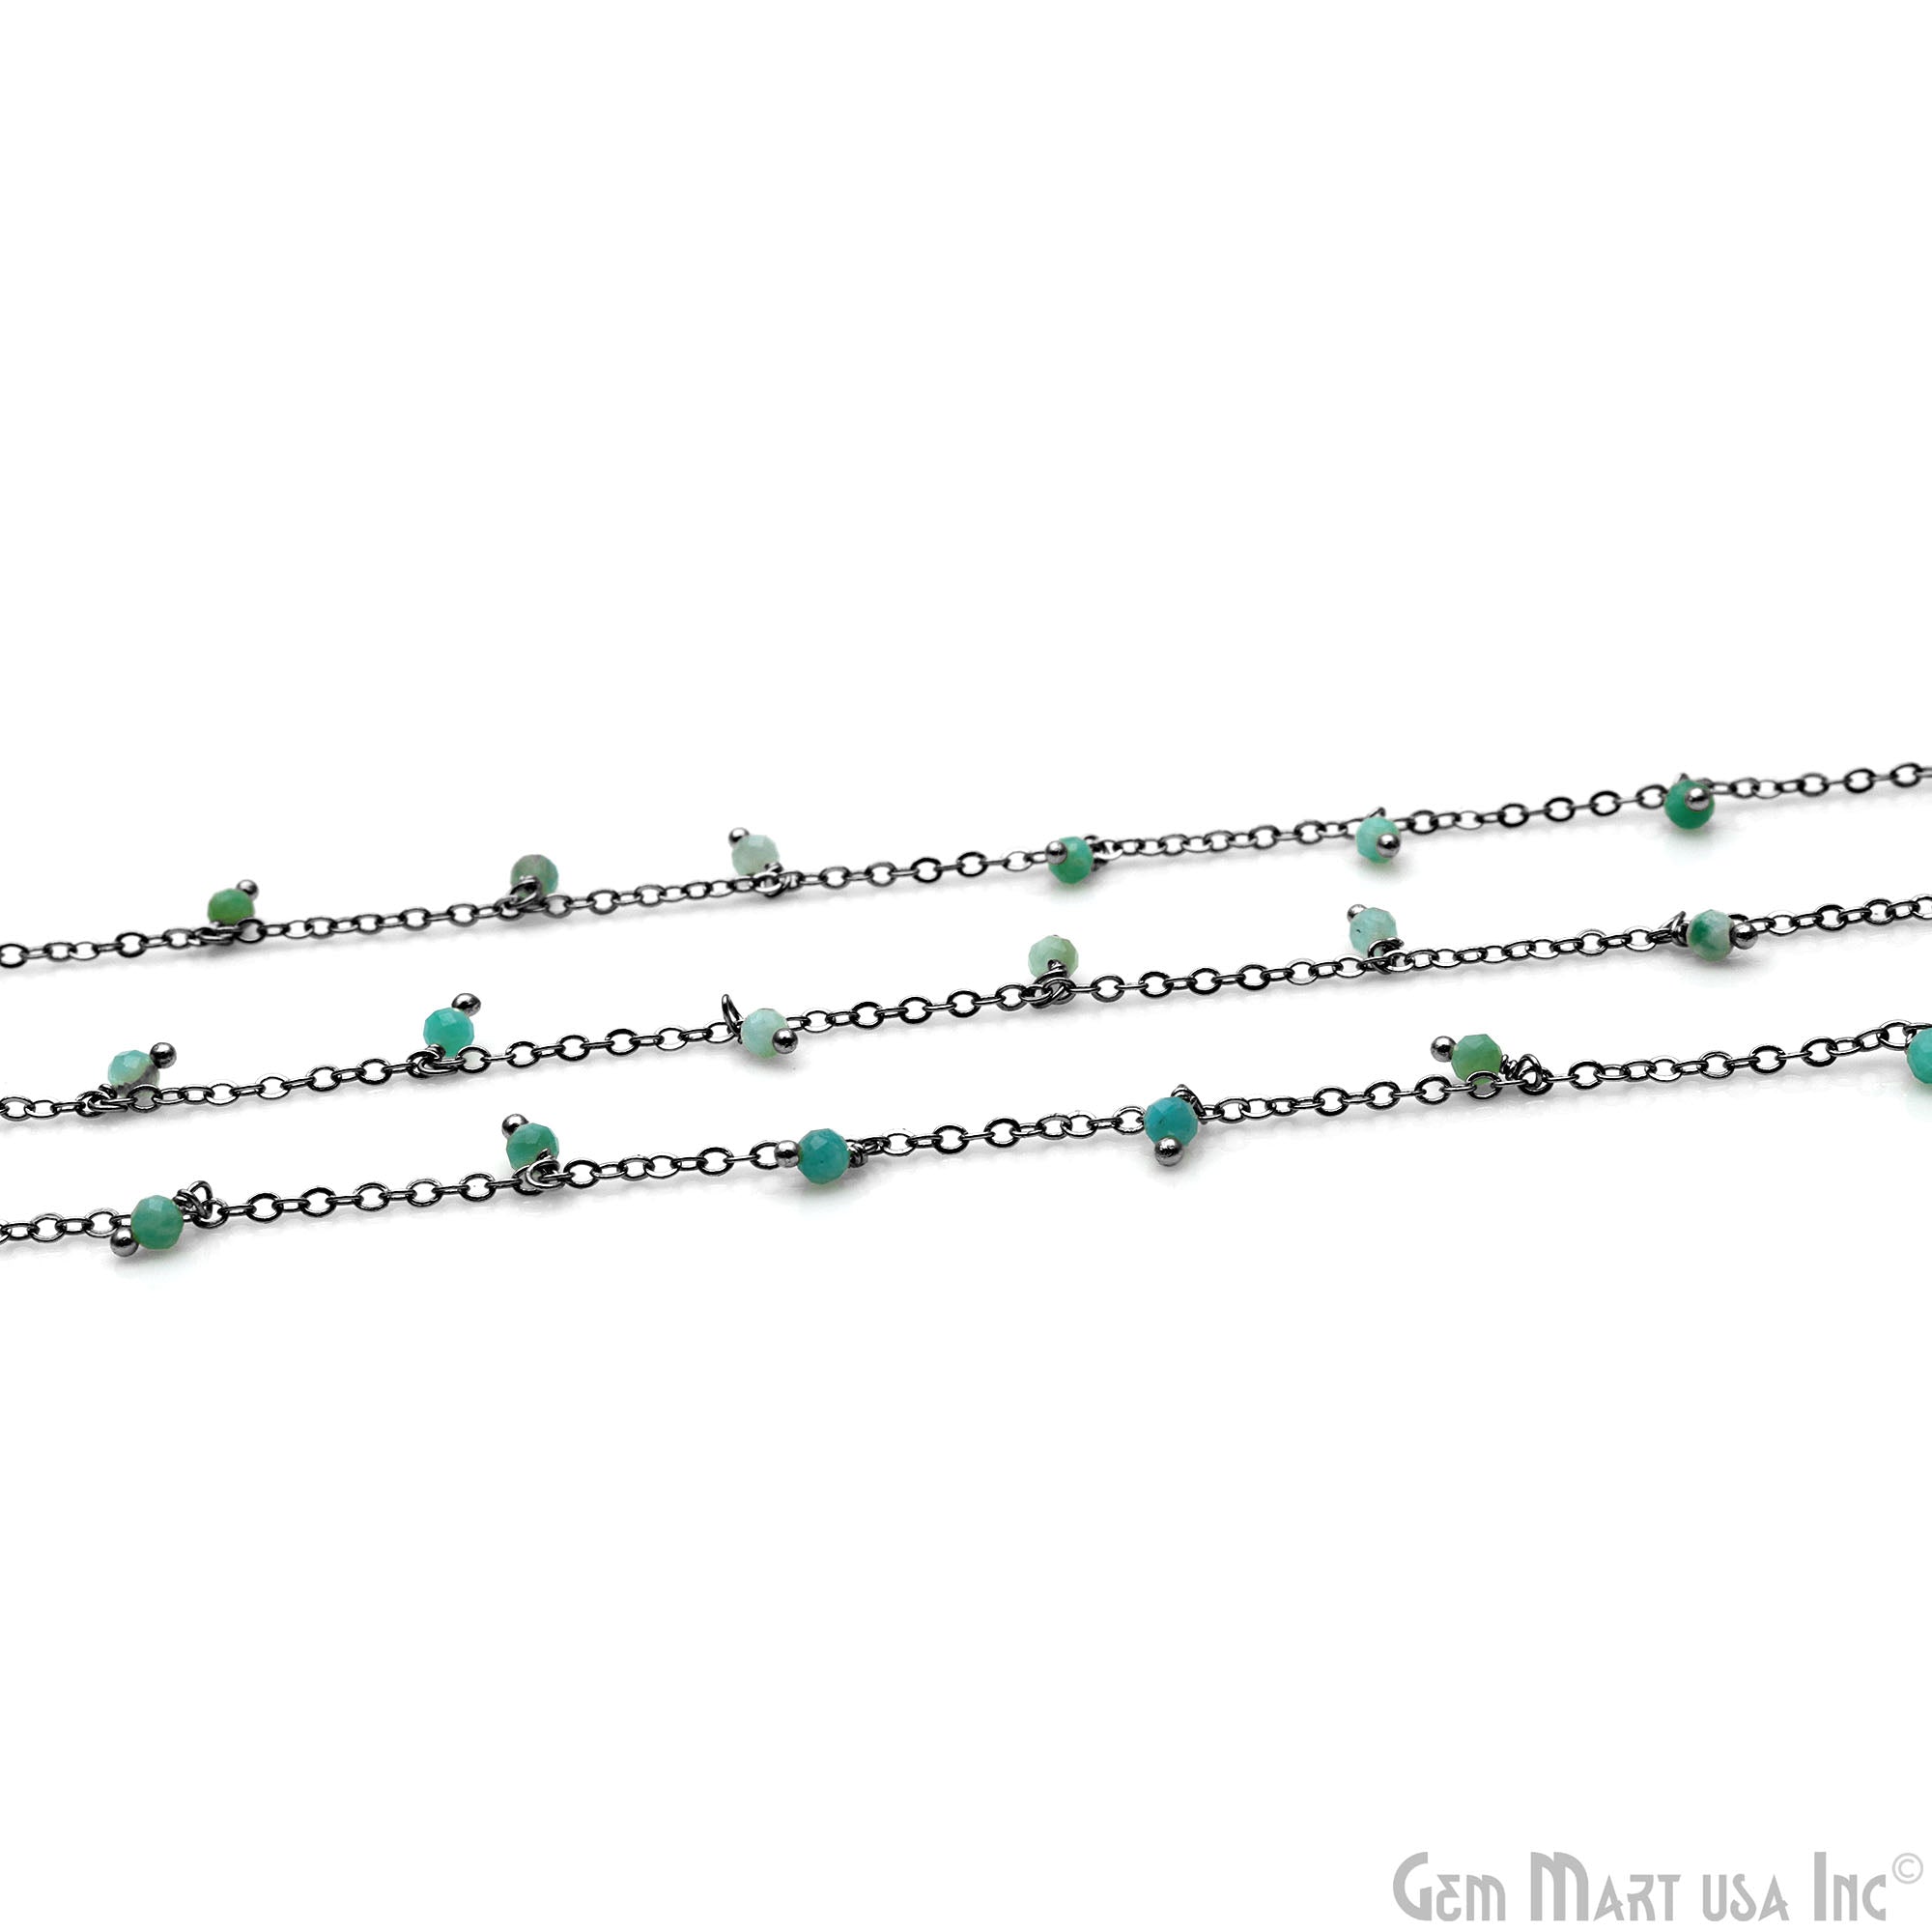 Chrysoprase Faceted Beads 3-4mm Oxidized Cluster Dangle Chain